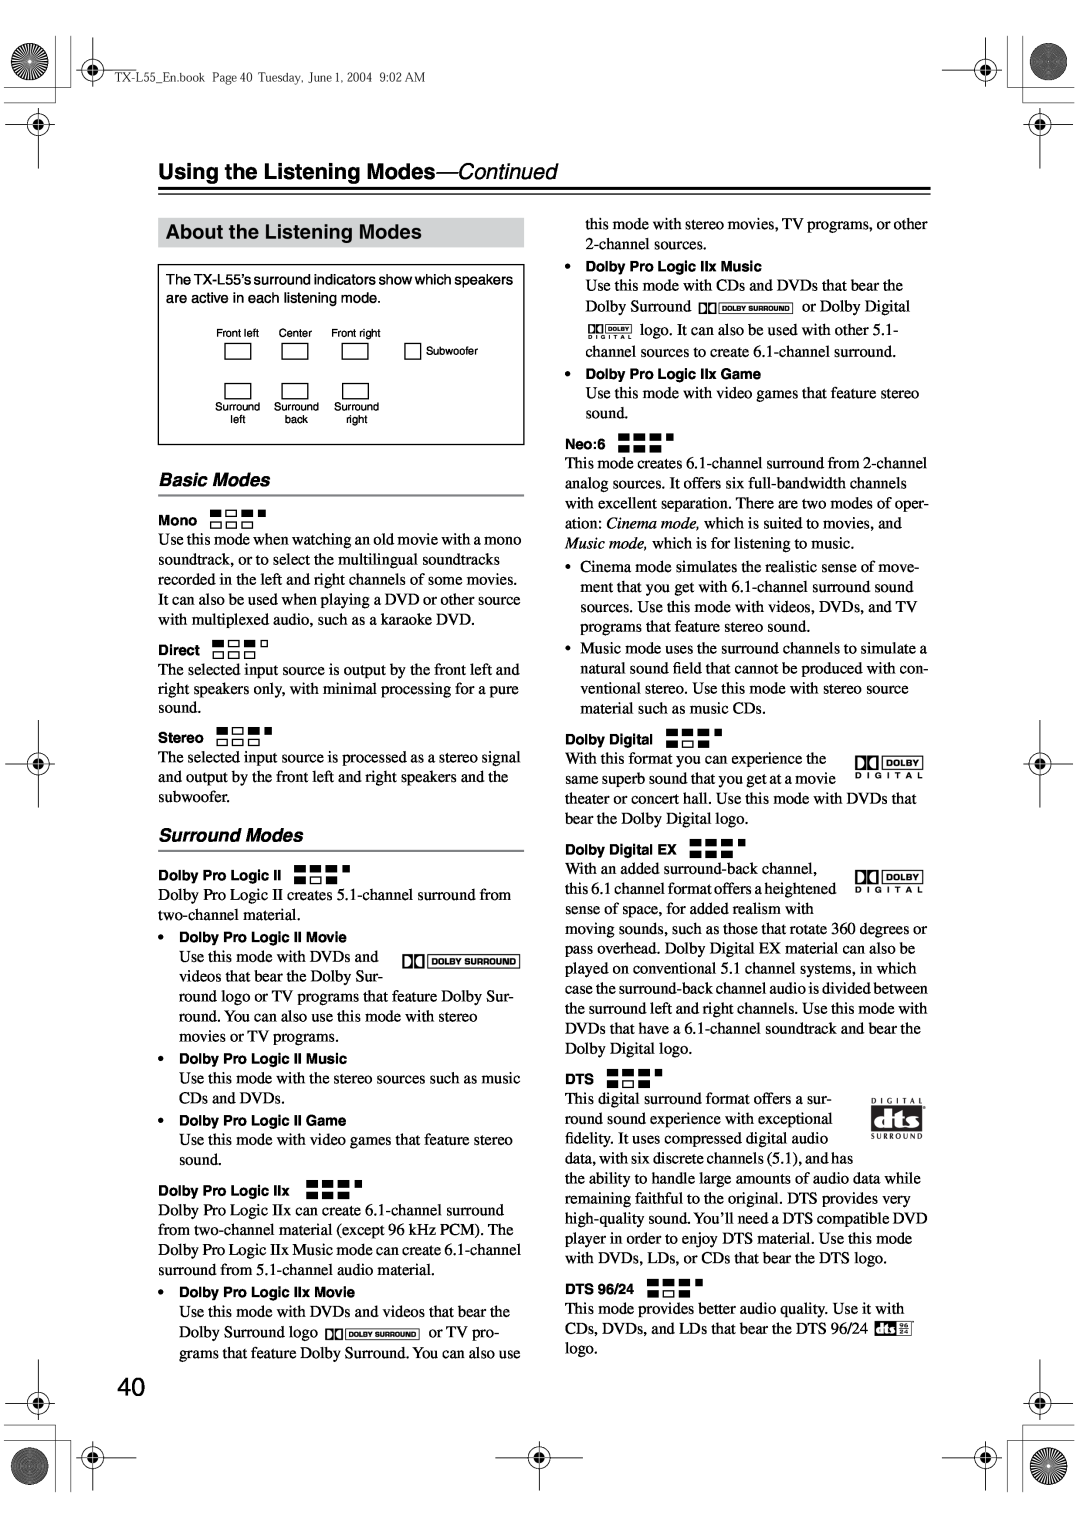 Onkyo TX-L55 instruction manual Using the Listening Modes-Continued, About the Listening Modes, Basic Modes, Surround Modes 